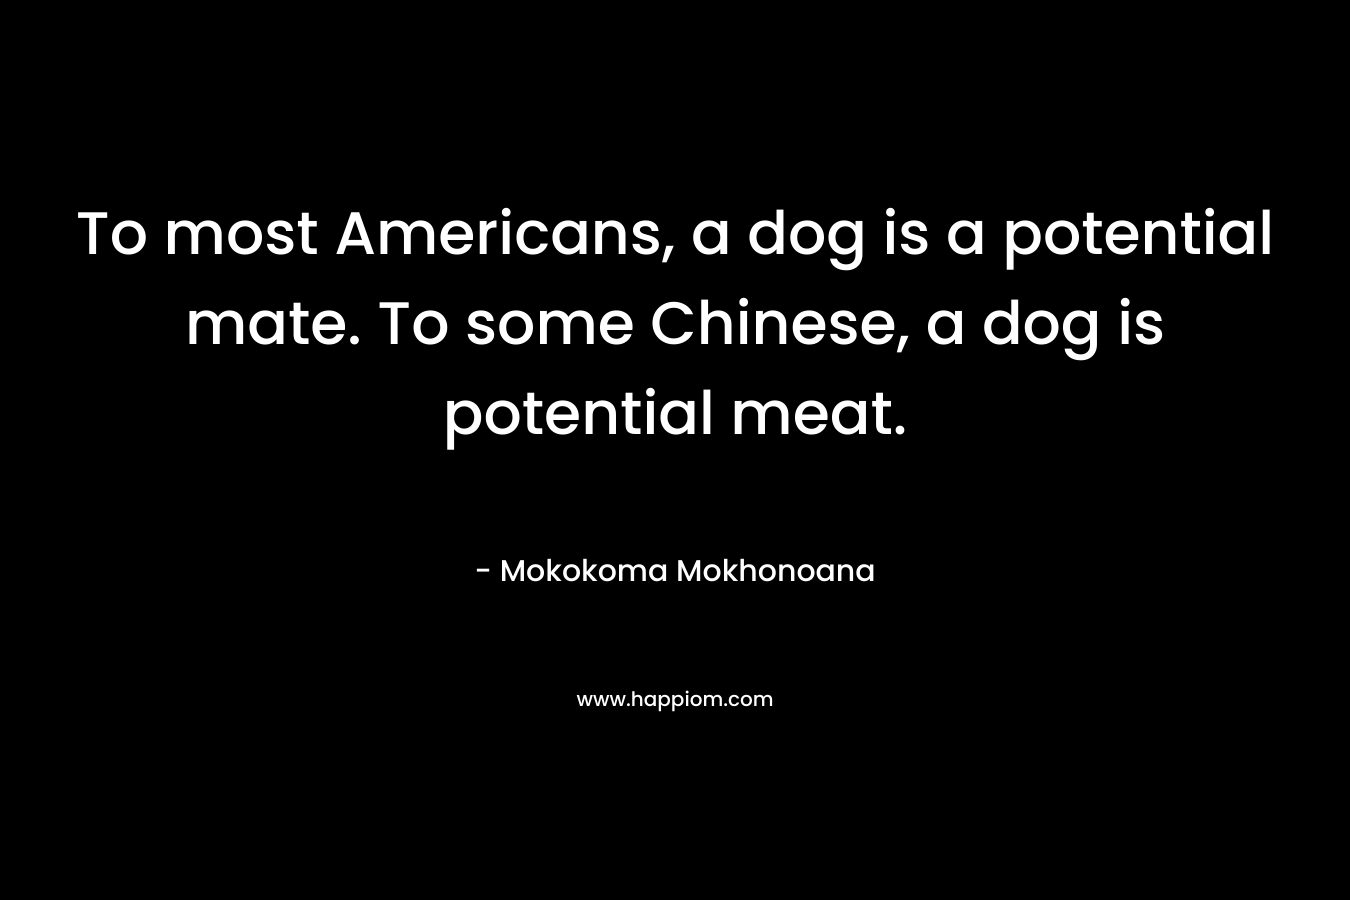 To most Americans, a dog is a potential mate. To some Chinese, a dog is potential meat. – Mokokoma Mokhonoana